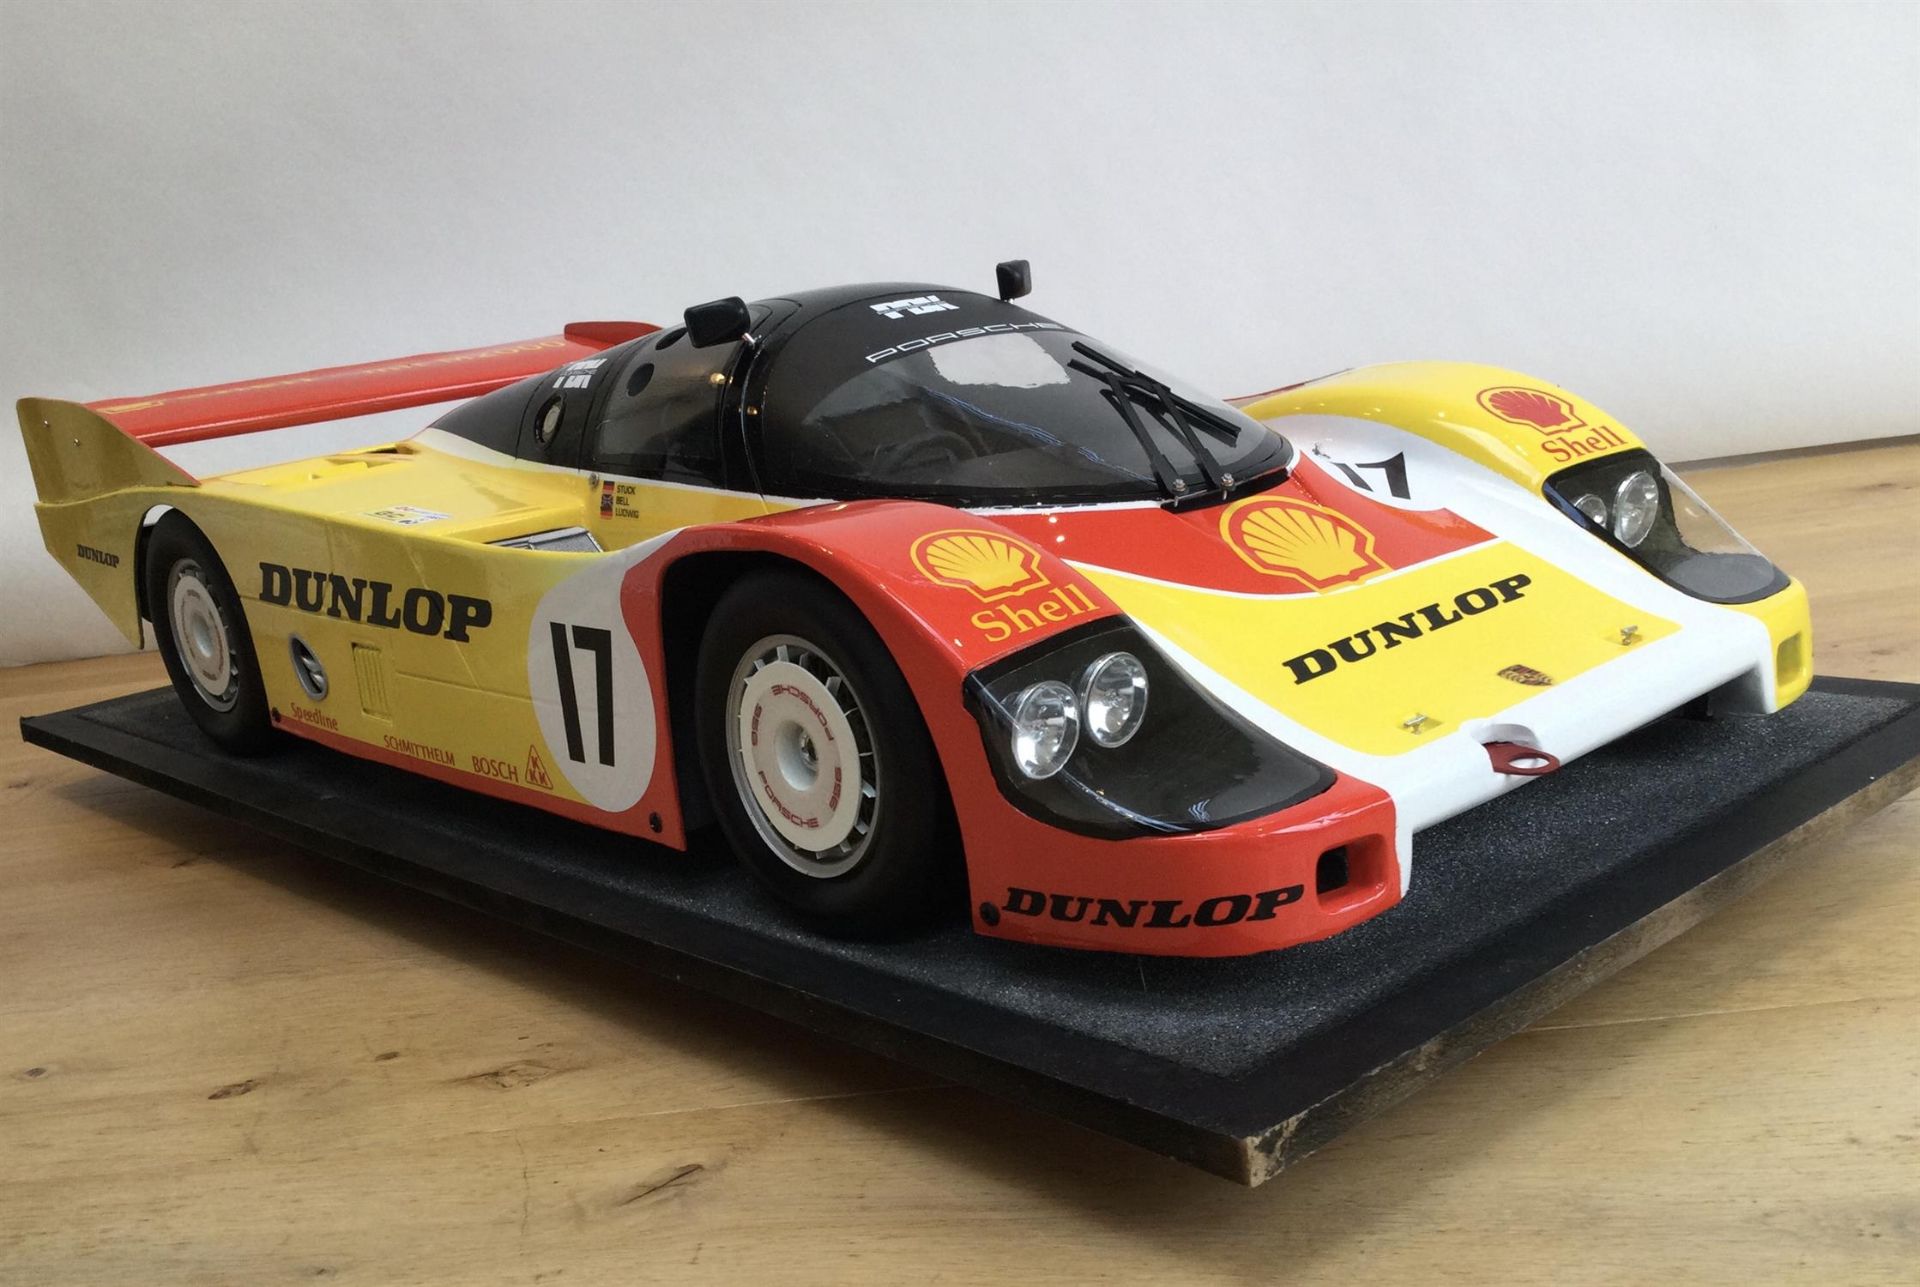 Stunning 1:5th Scale Dunlop-Shell Porsche 956 by Javan Smith - Image 8 of 10